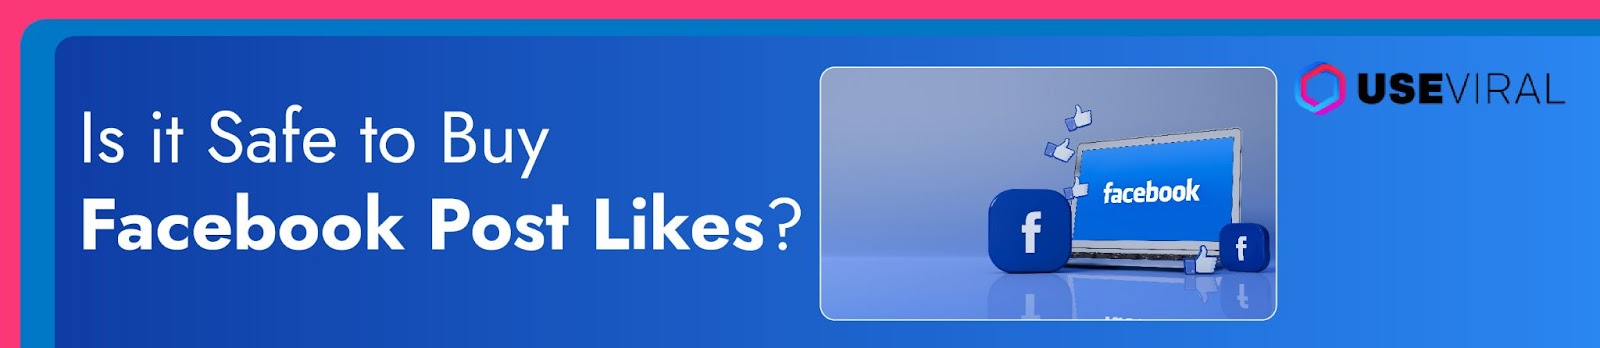 Is it Safe to Buy Facebook Post Likes?